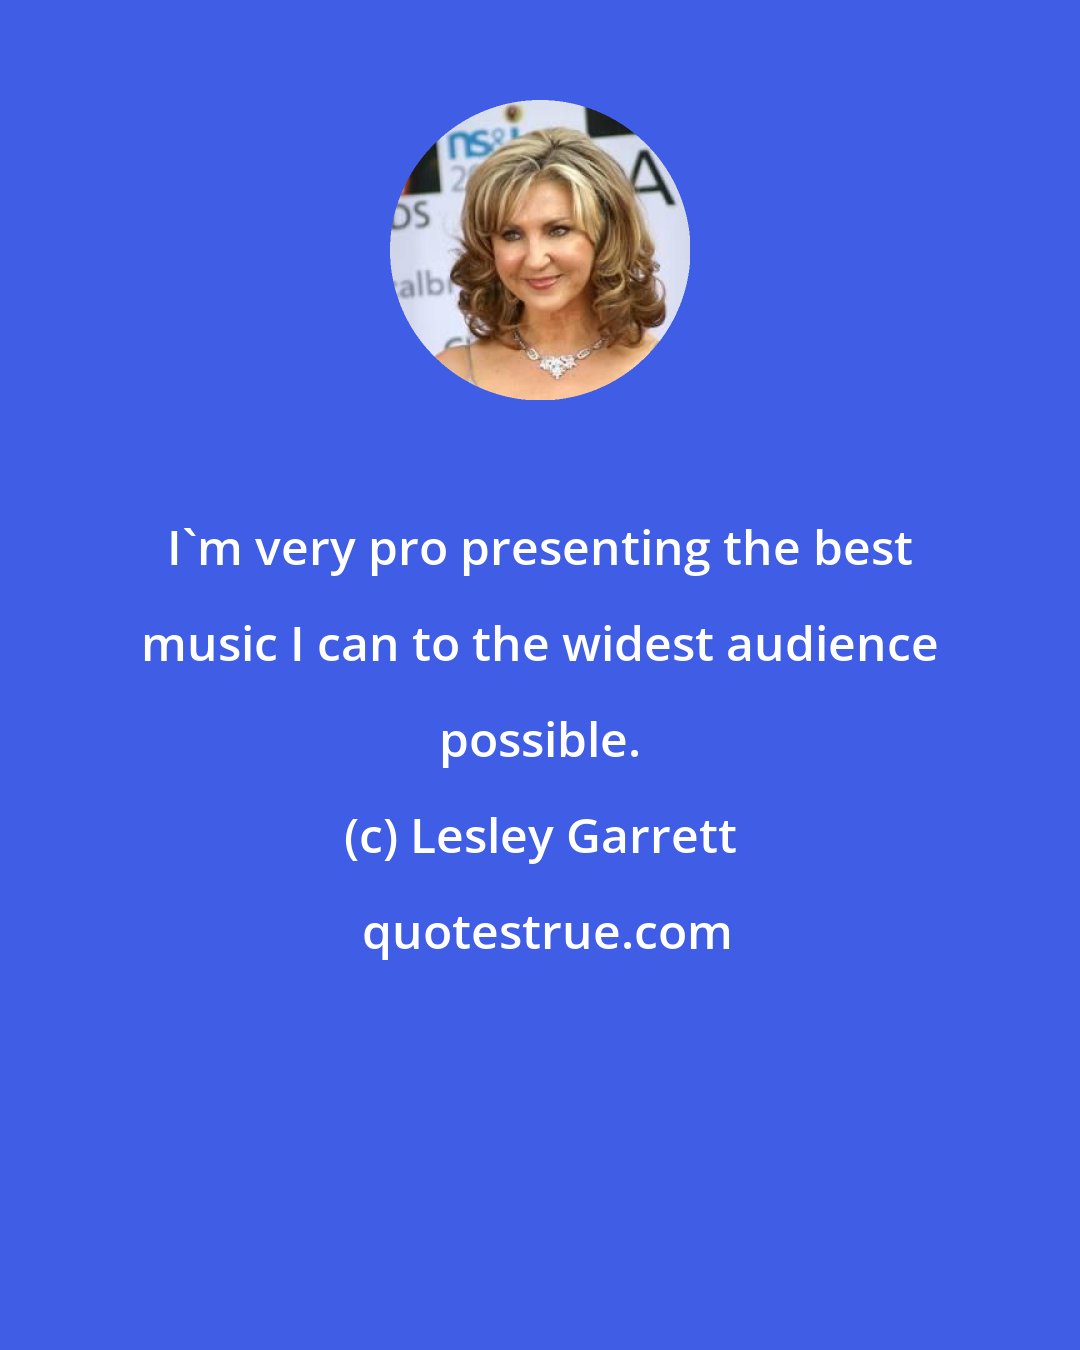 Lesley Garrett: I'm very pro presenting the best music I can to the widest audience possible.